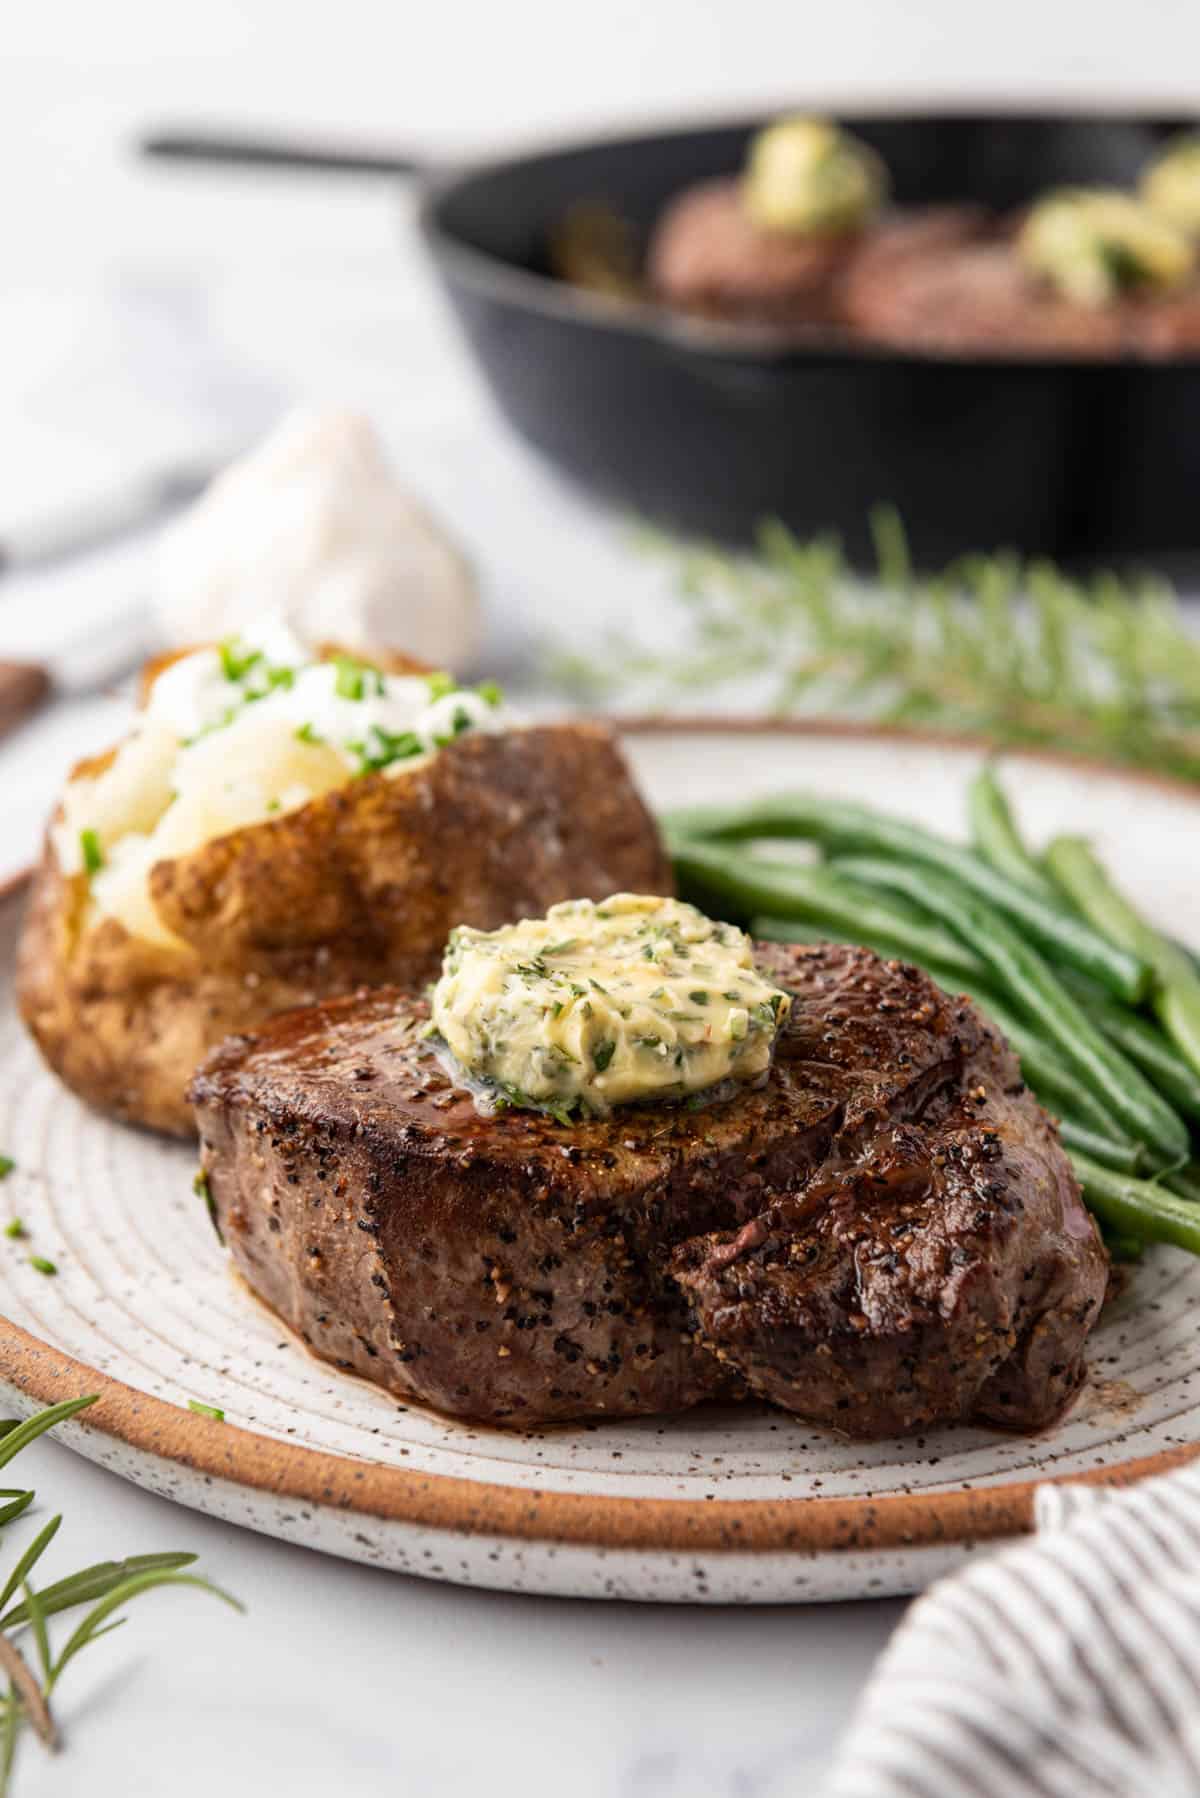 A cooked filet mignon on a plate with a baked potato, green beans, and garlic herb butter.